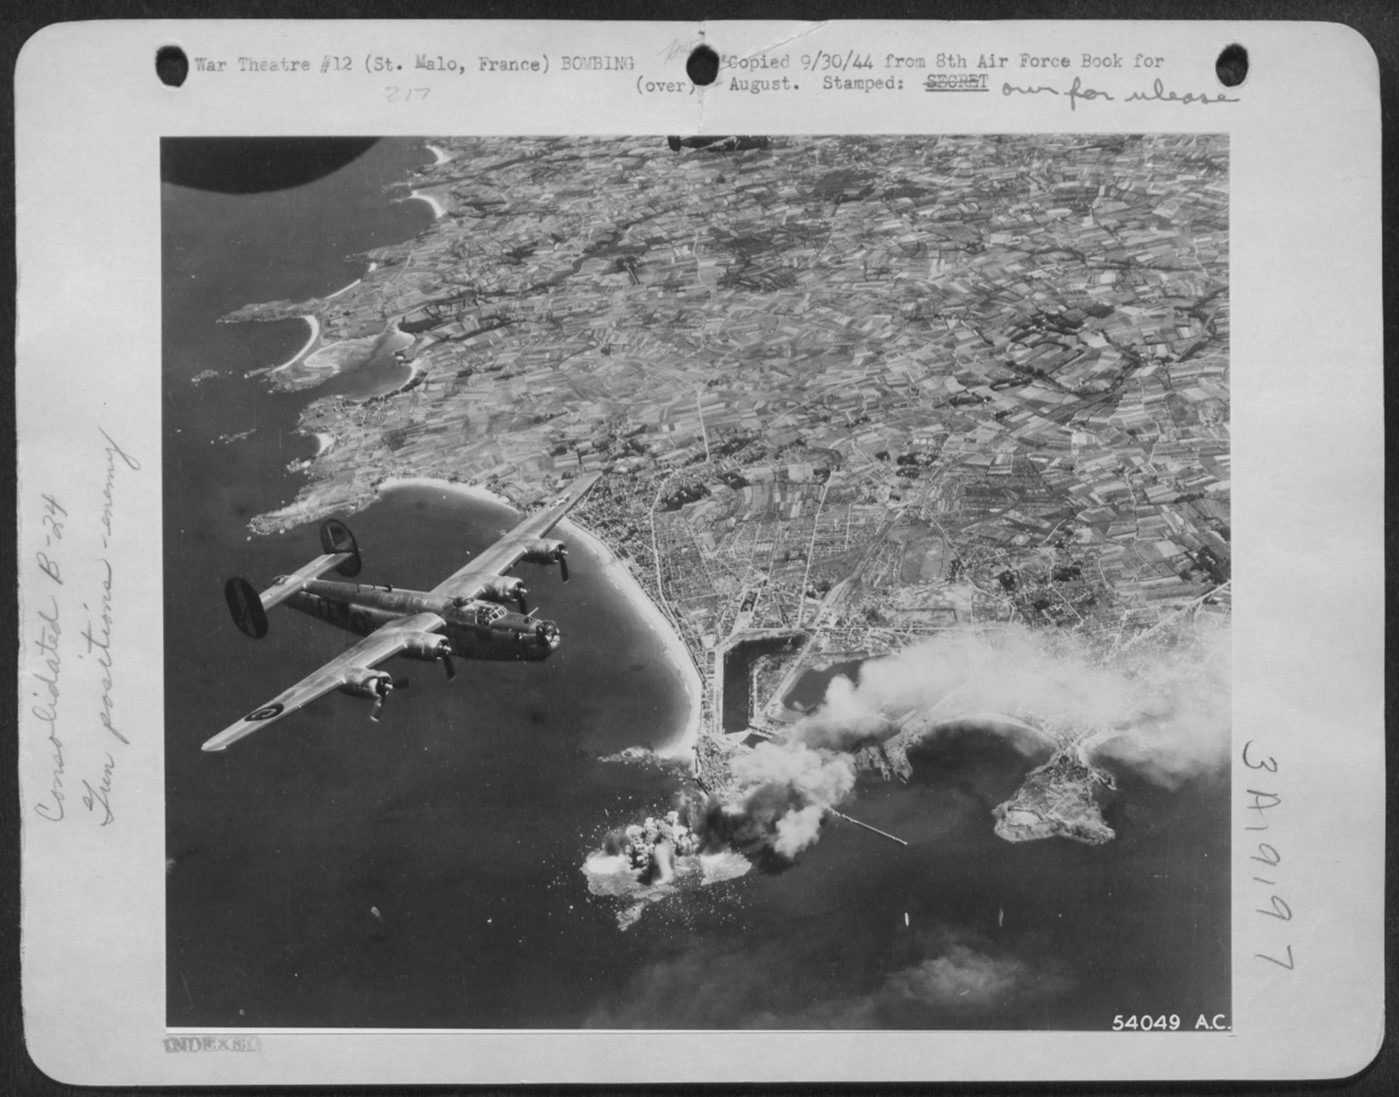 Consolidated B-24 bombers attack Saint-Malo in August 1944